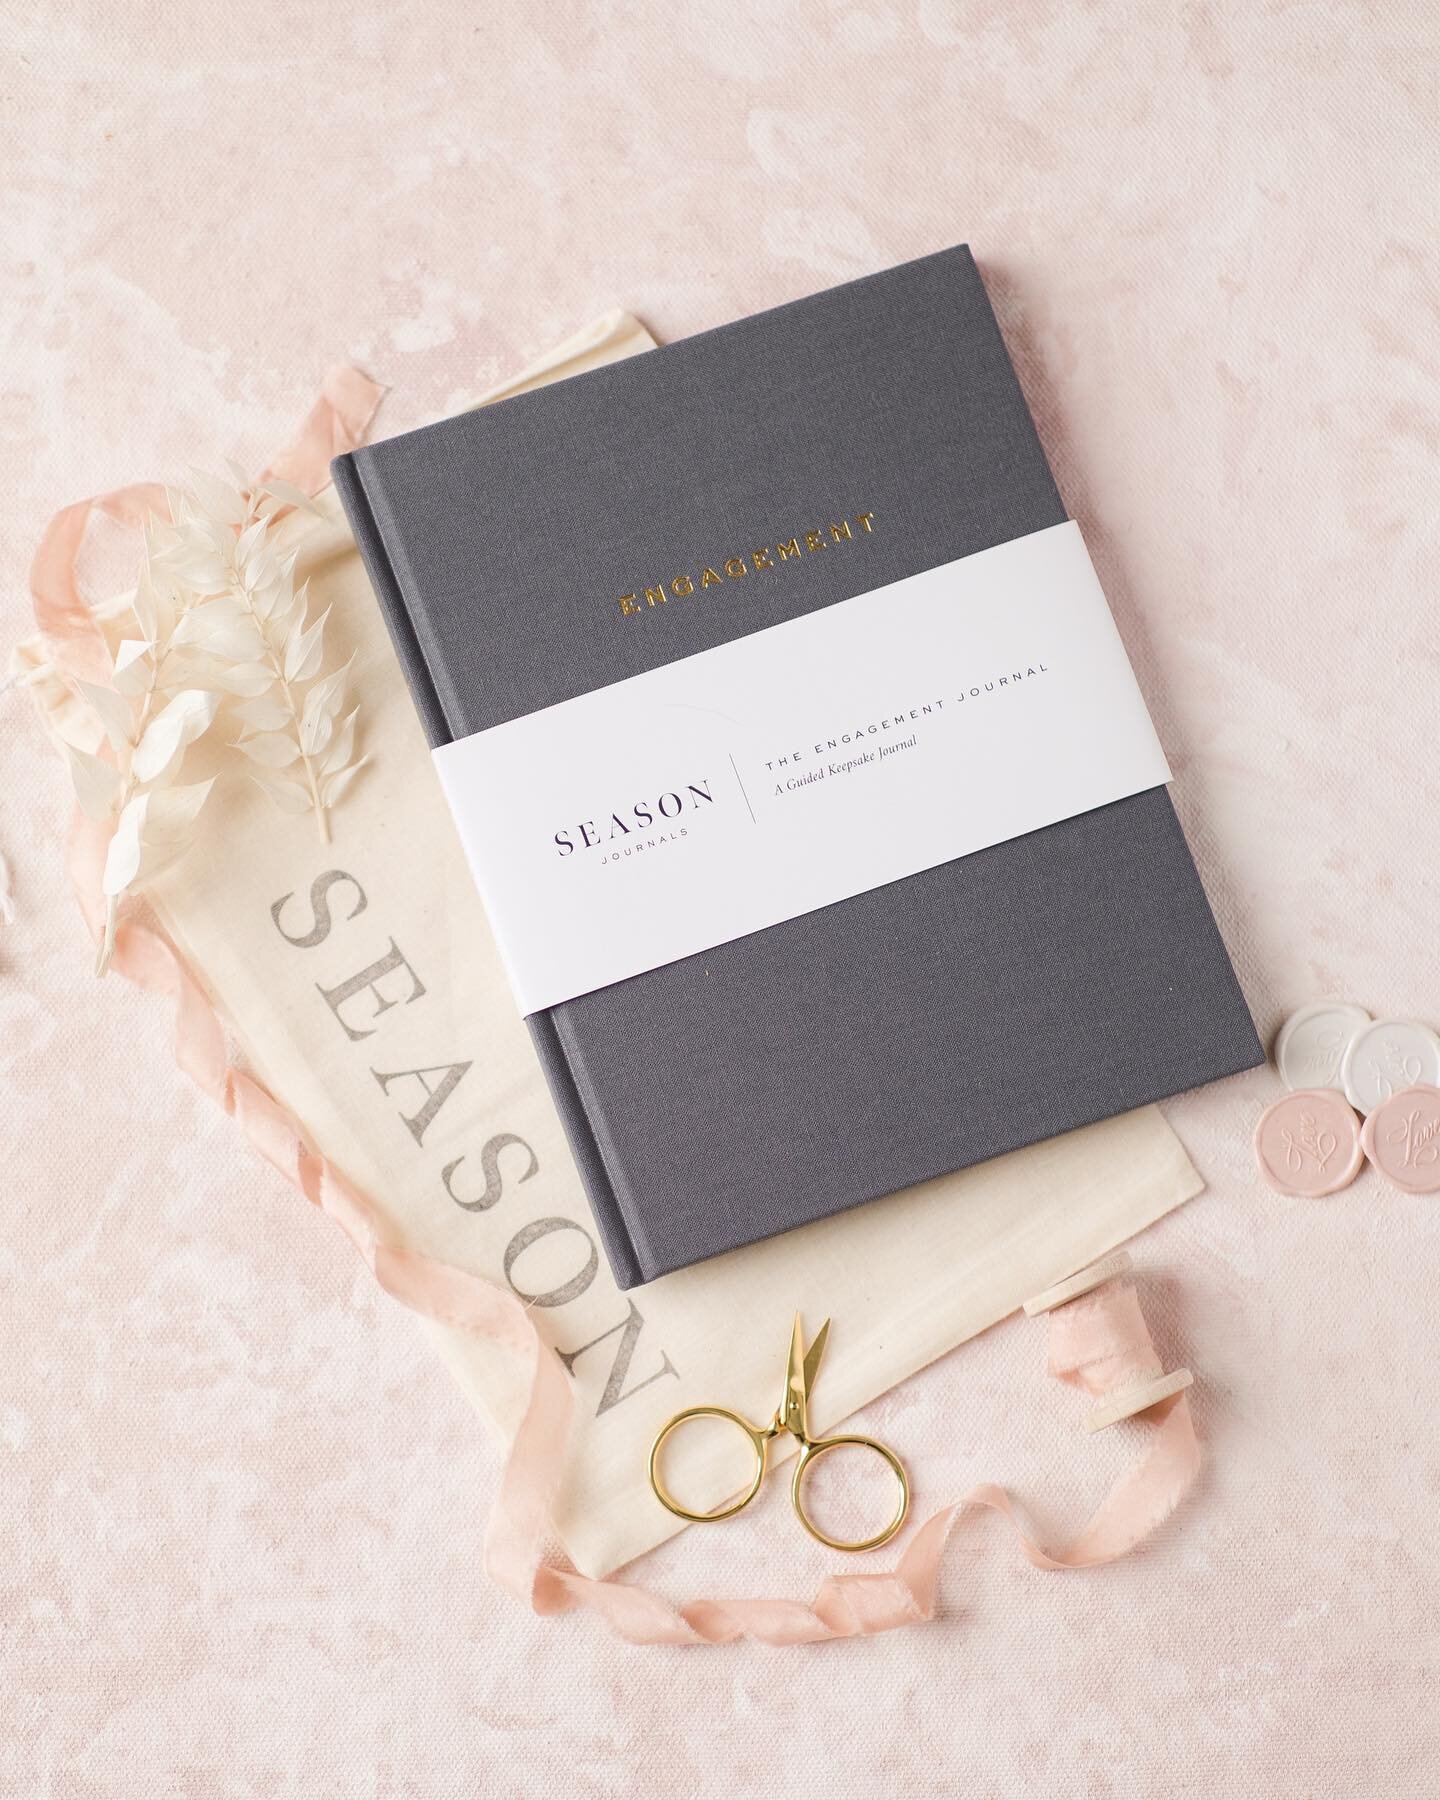 As engagement season comes to an end, it&rsquo;s the perfect time for a GIVEAWAY to all you newly engaged couples looking to document this exciting season in your life! @seasonjournals is a must have if you value intentional planning focused not only